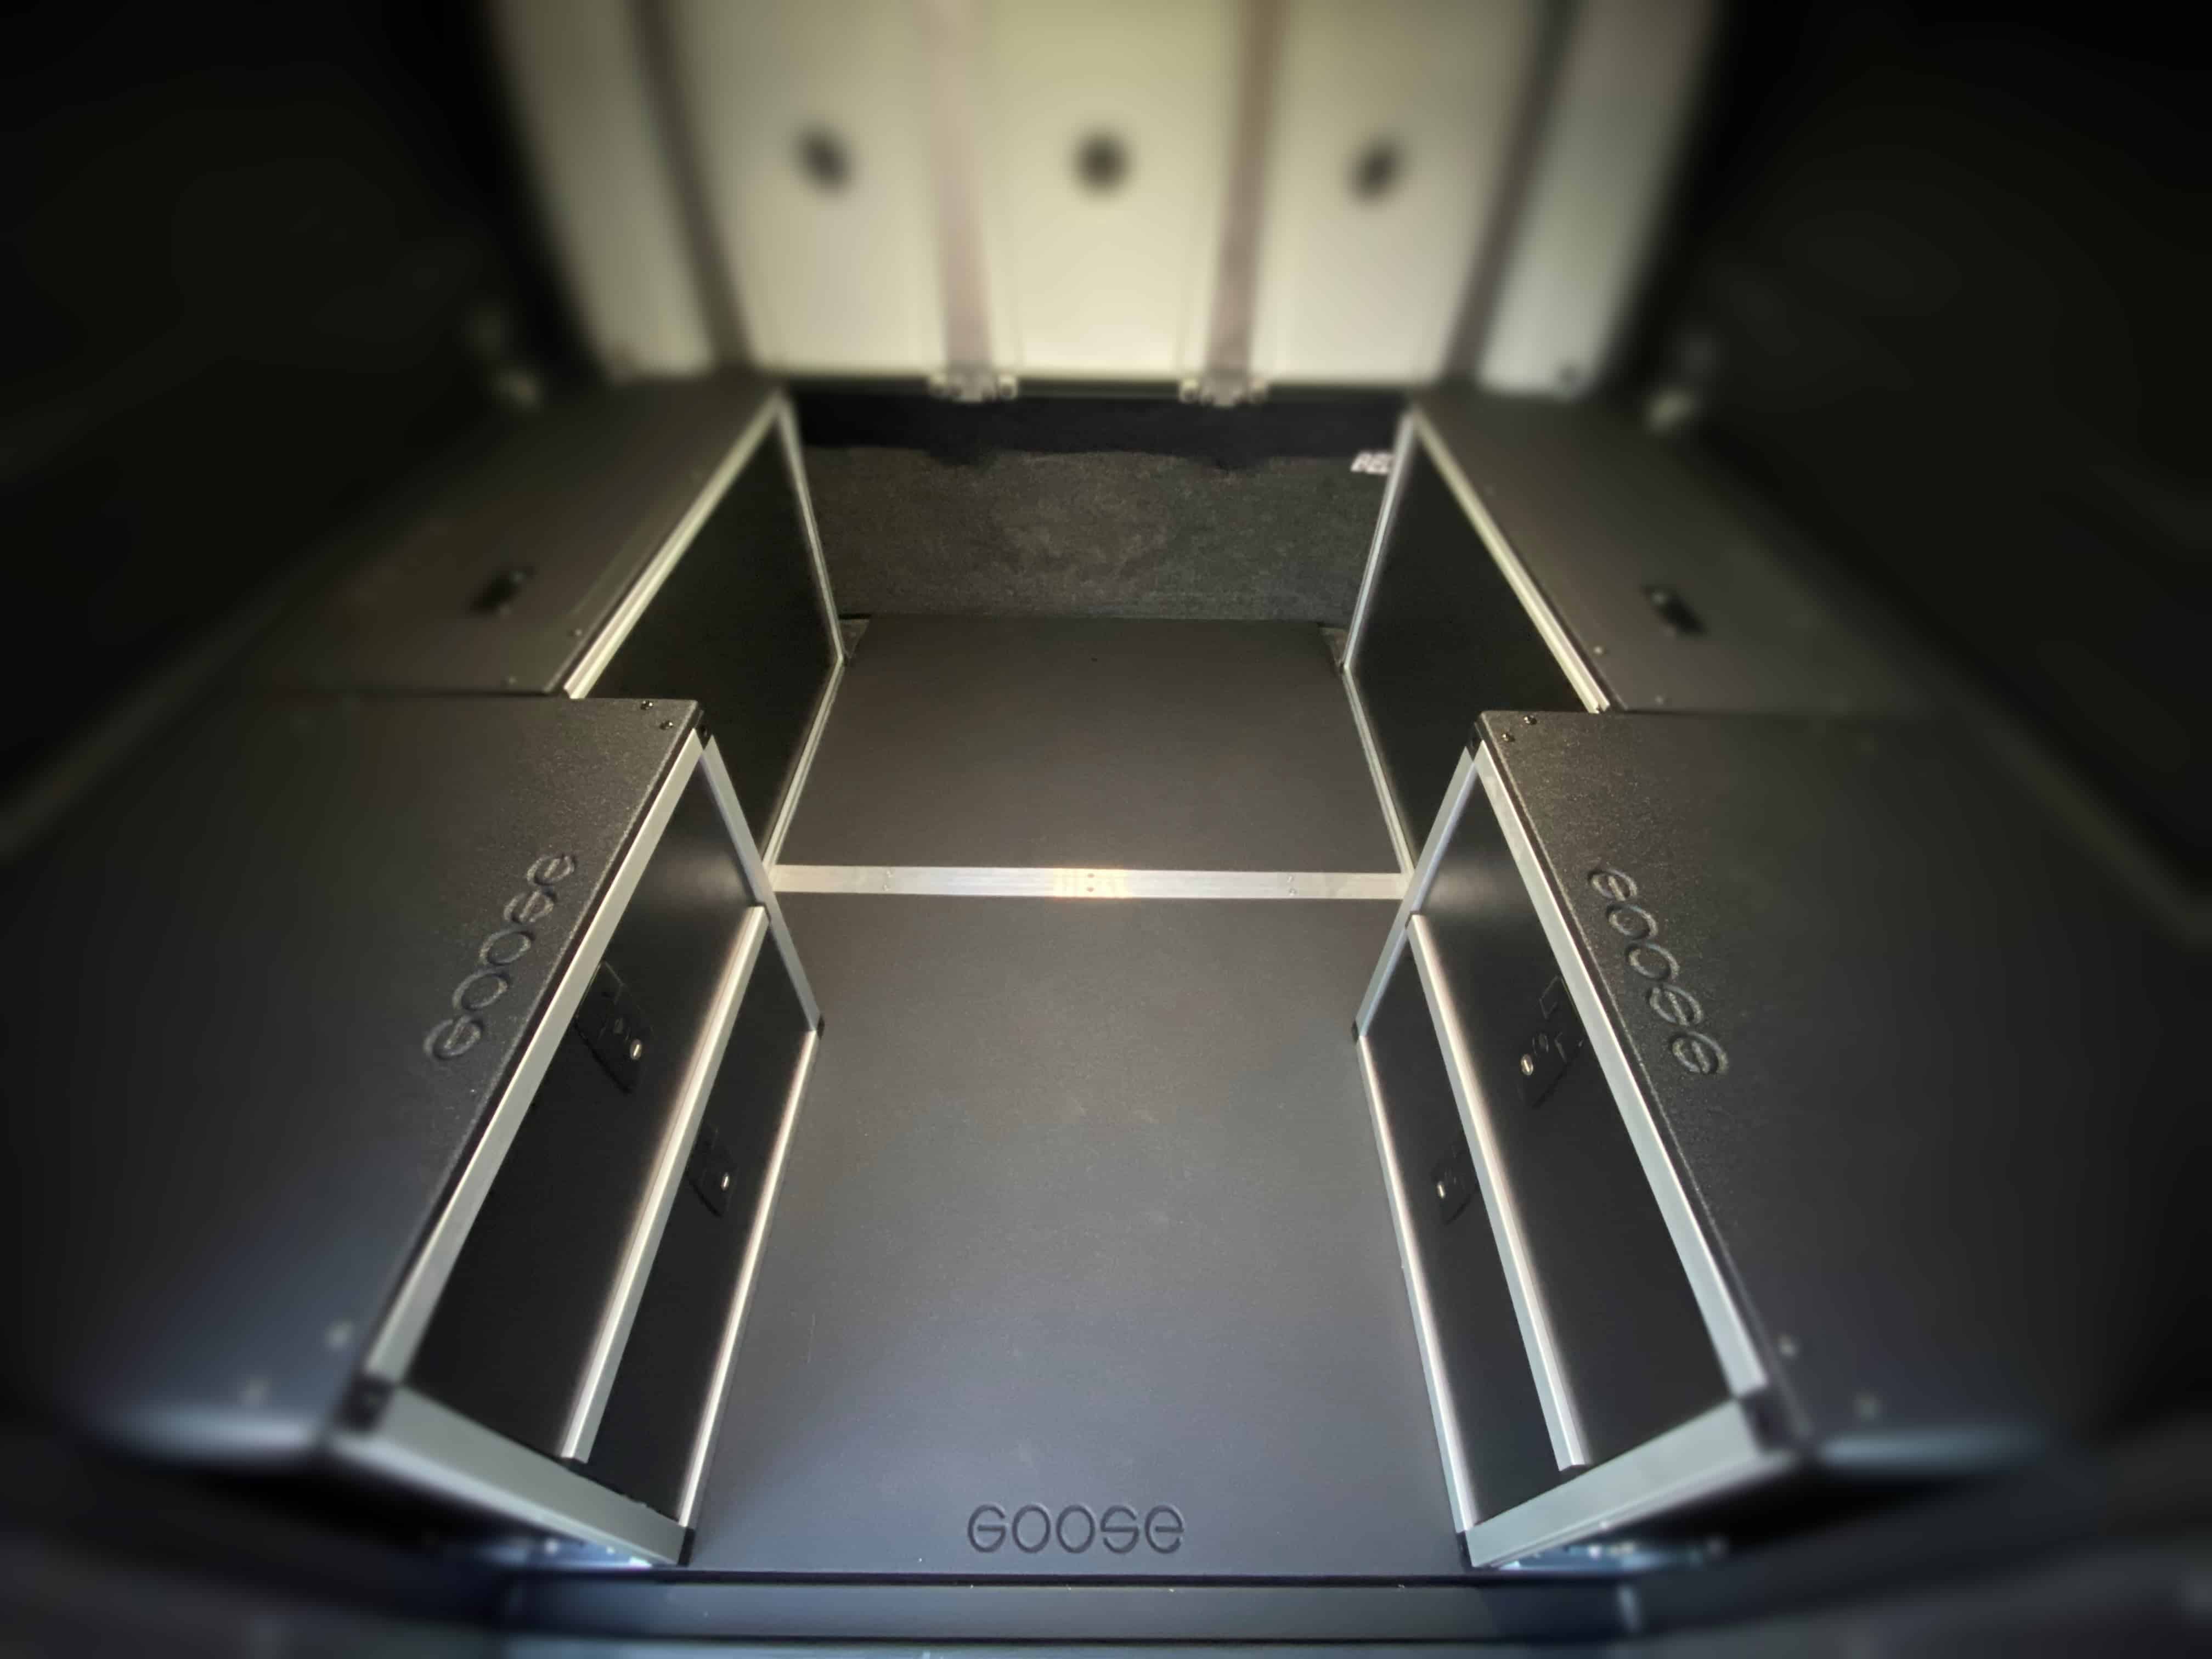 Alu-Cab Canopy Camper V2 - Chevy Colorado/GMC Canyon 2015-Present 2nd Gen. - Bed Plate System - 6' Bed